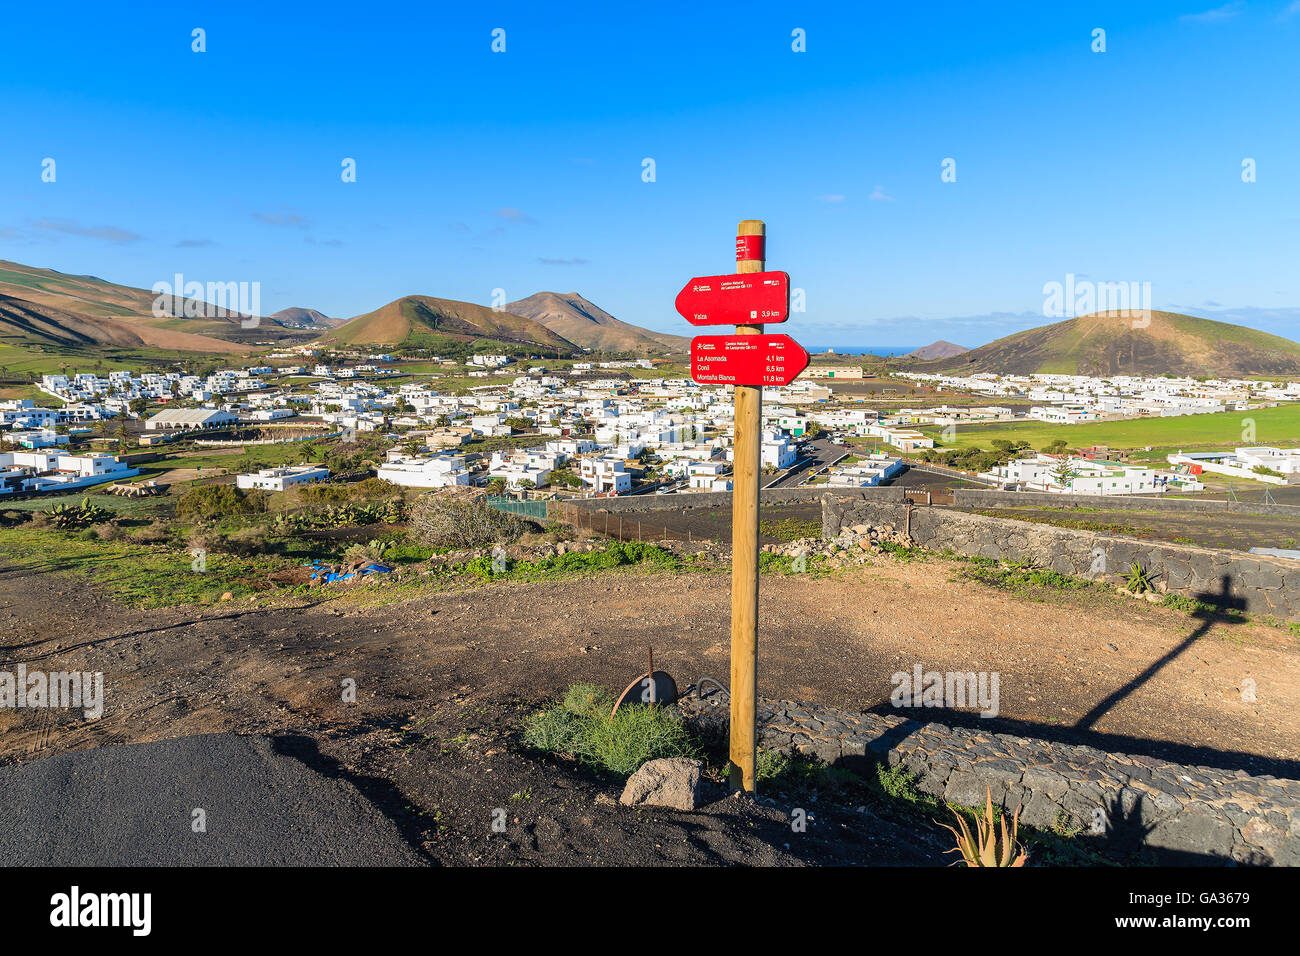 Trekking sign with Uga village in background, Lanzarote, Canary Islands, Spain Stock Photo